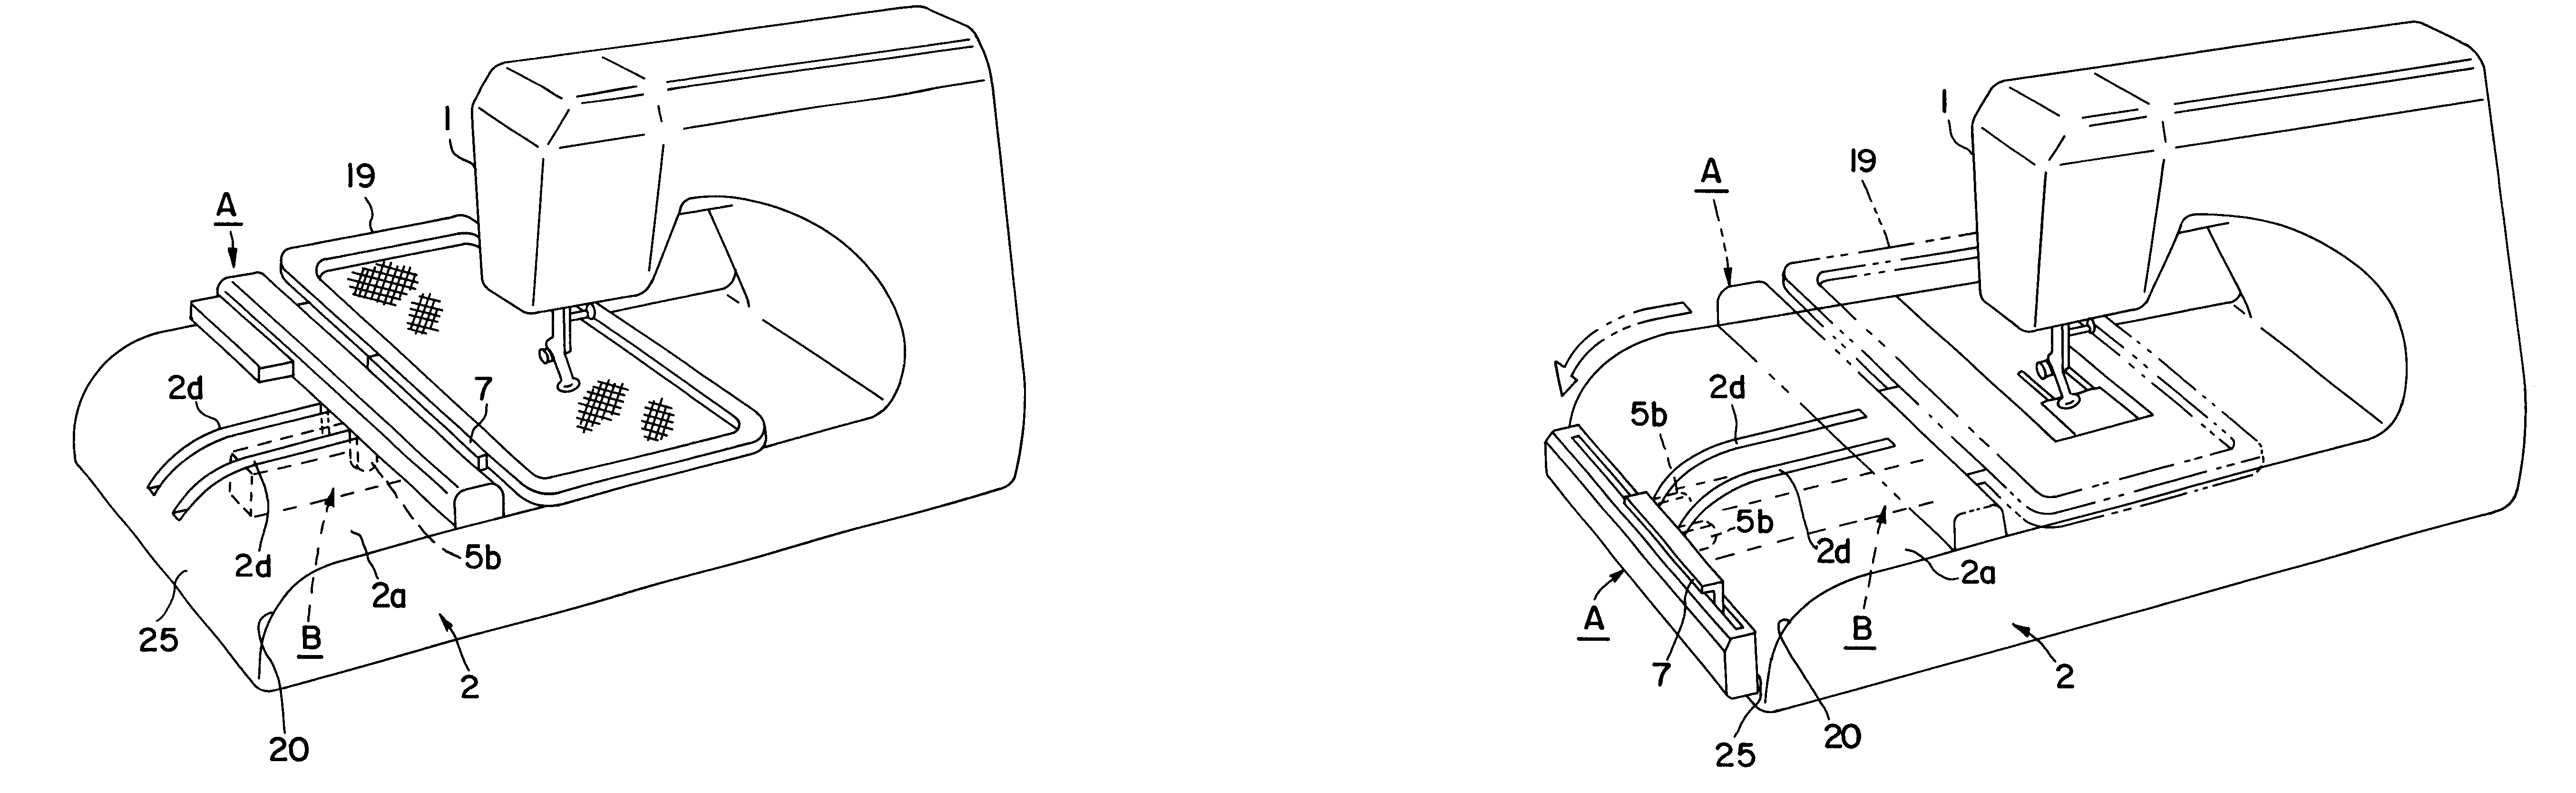 Sewing machine with an embroidery stitching function